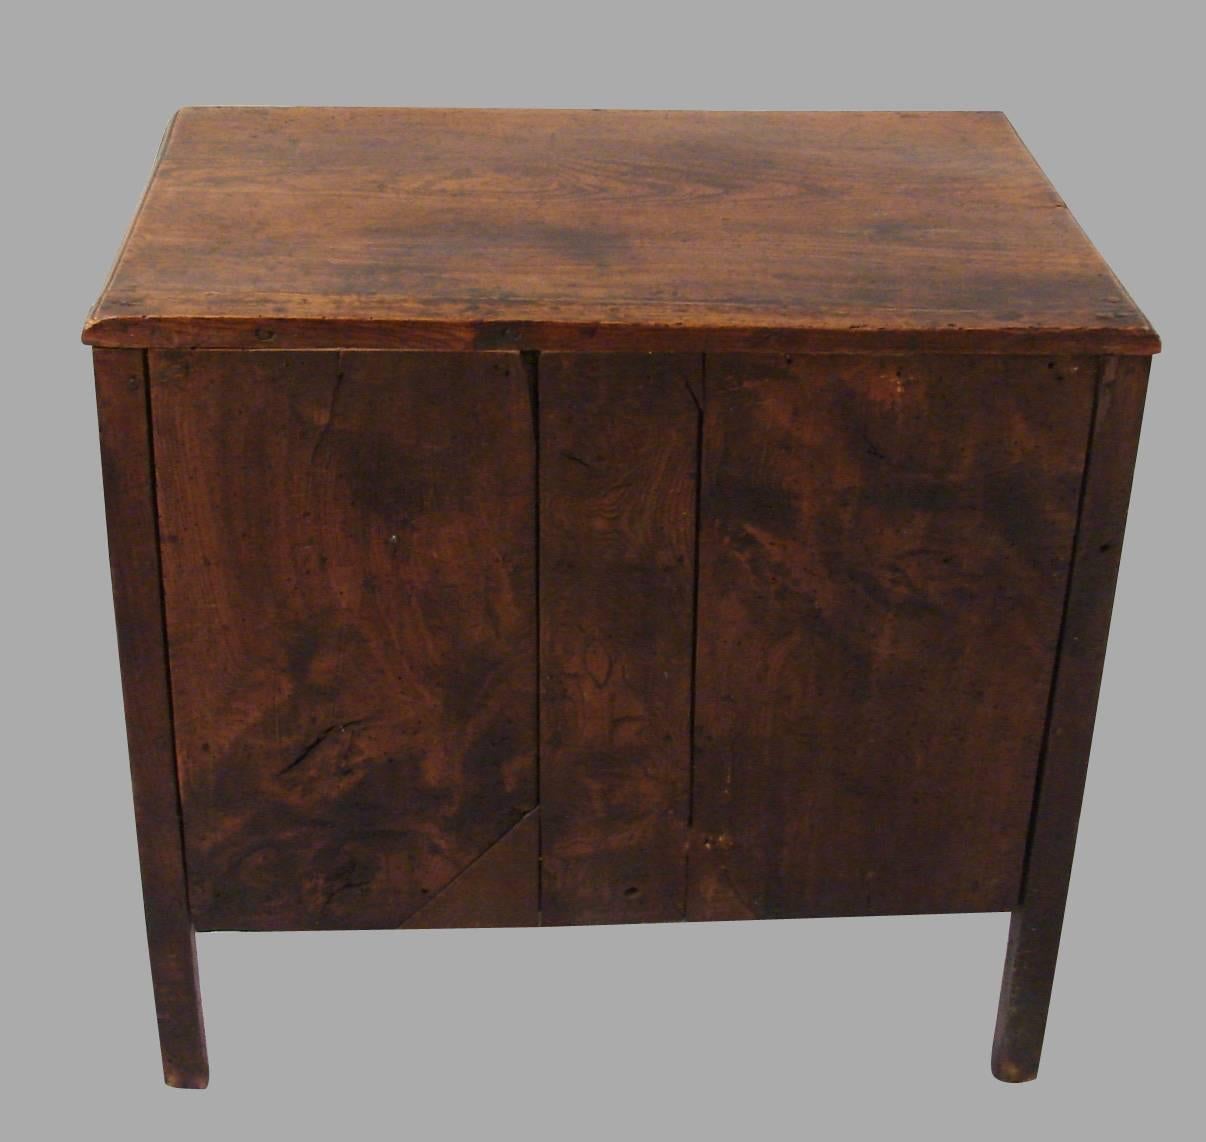 An English Georgian Provincial elm chest of small size, the molded top above six short drawers supported on square legs. Attractive color and patina.